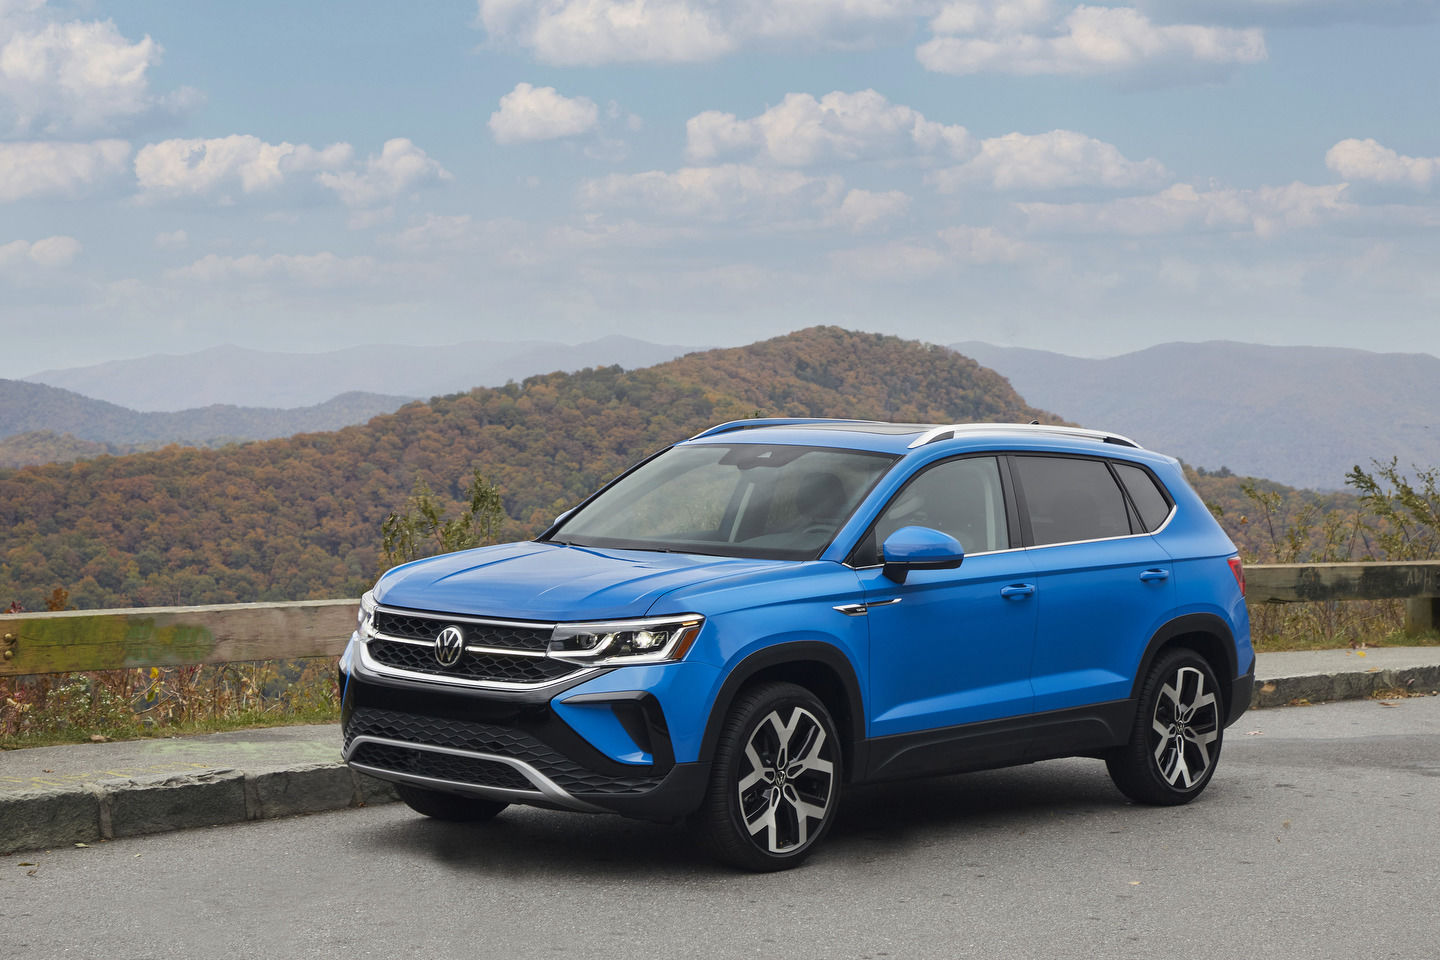 Impressive safety features that help the 2022 Volkswagen Taos stand out